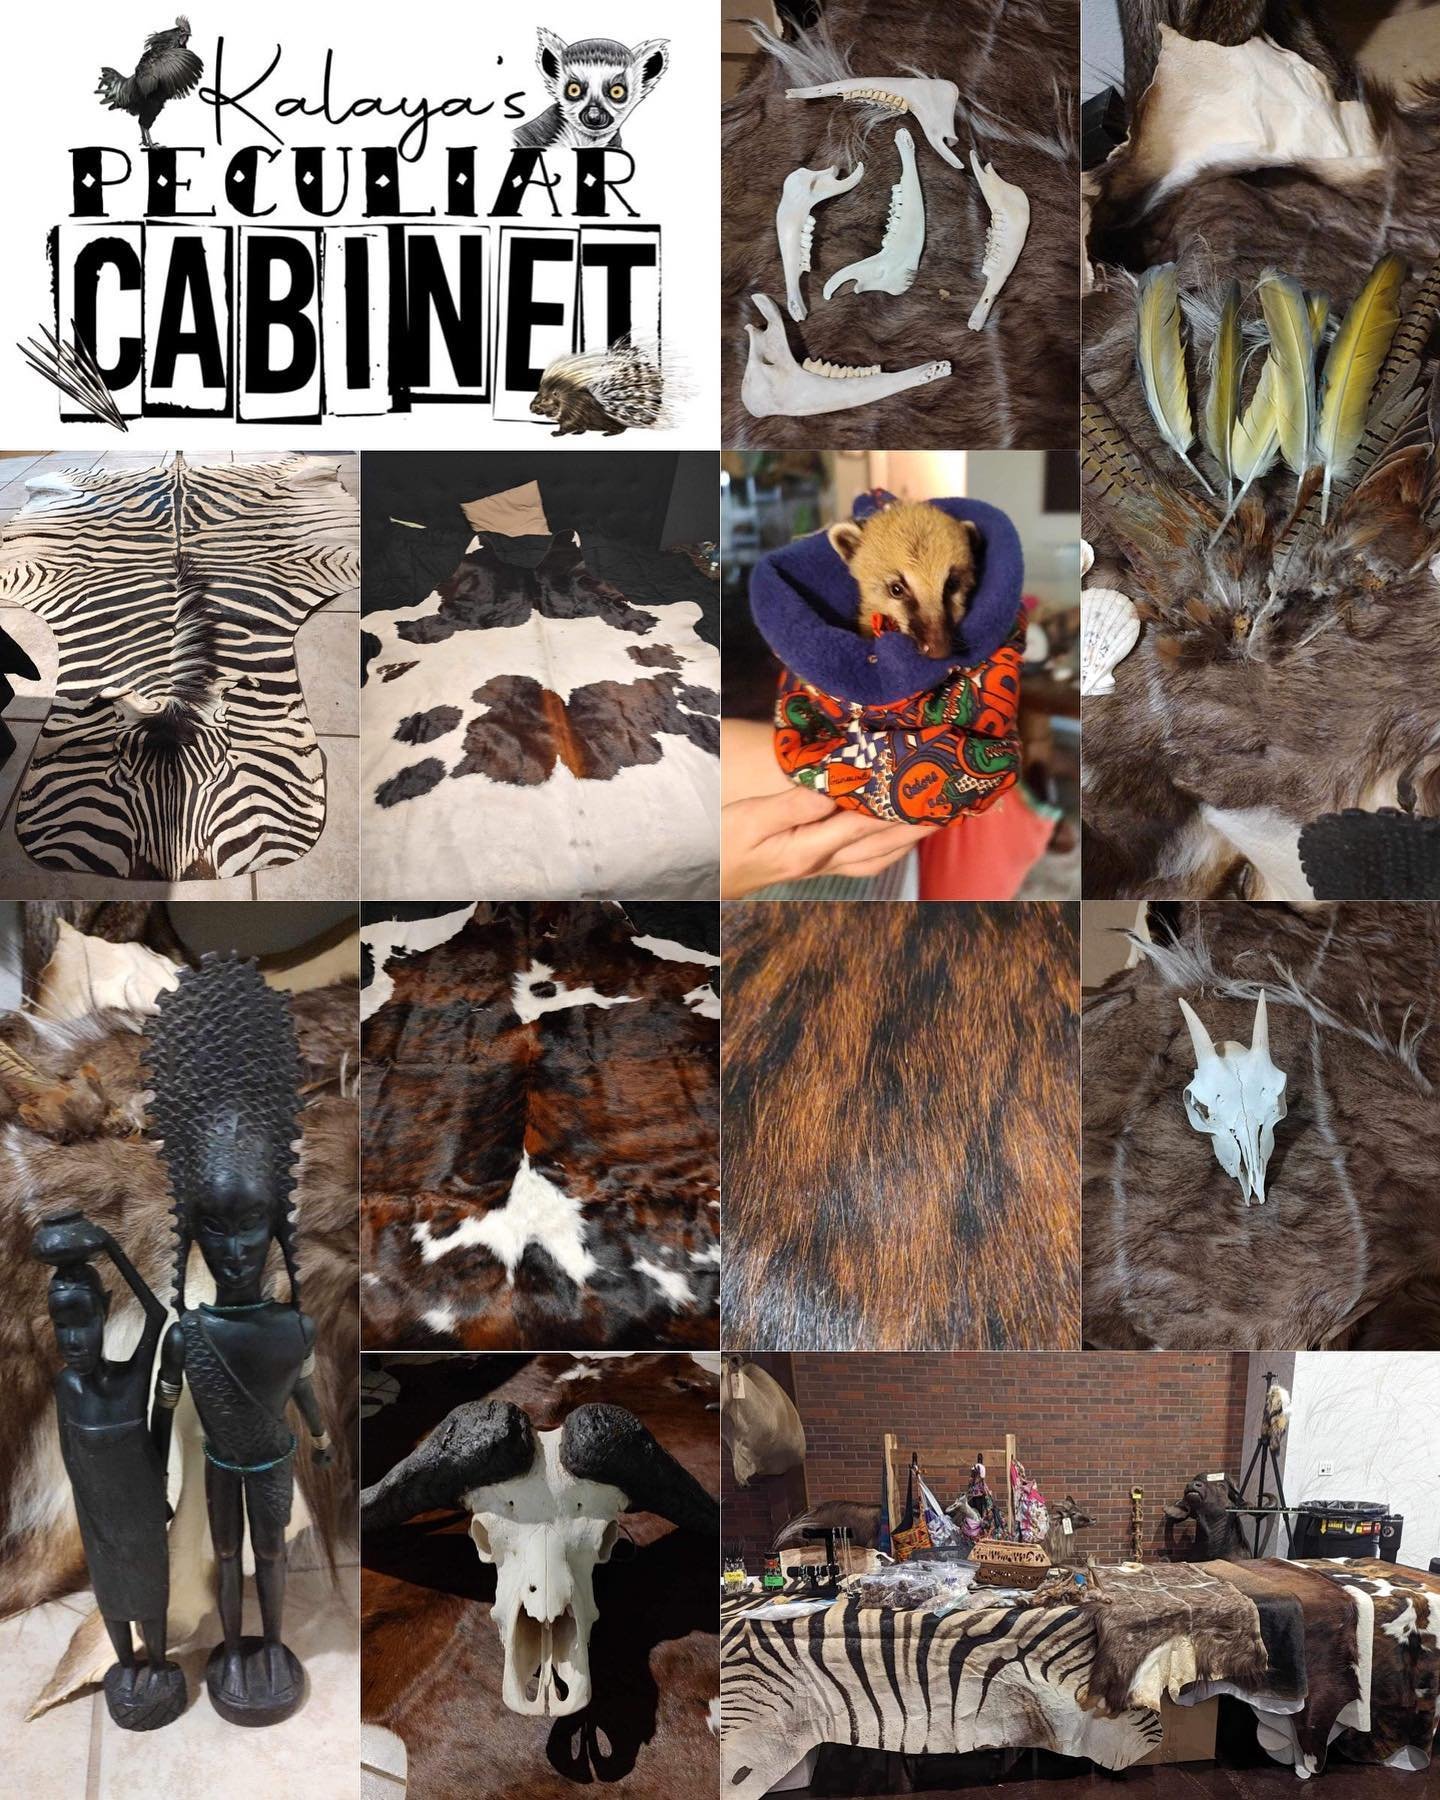 Kalaya&rsquo;s Peculiar Cabinet will be joining us June 2nd! 

They do ethically sourced exotic taxidermy such as zebra, kudu, gemsbok, impala hides, various African hoof stock, imported Brazilian cowhides, bones, quills, and oddities. They will also